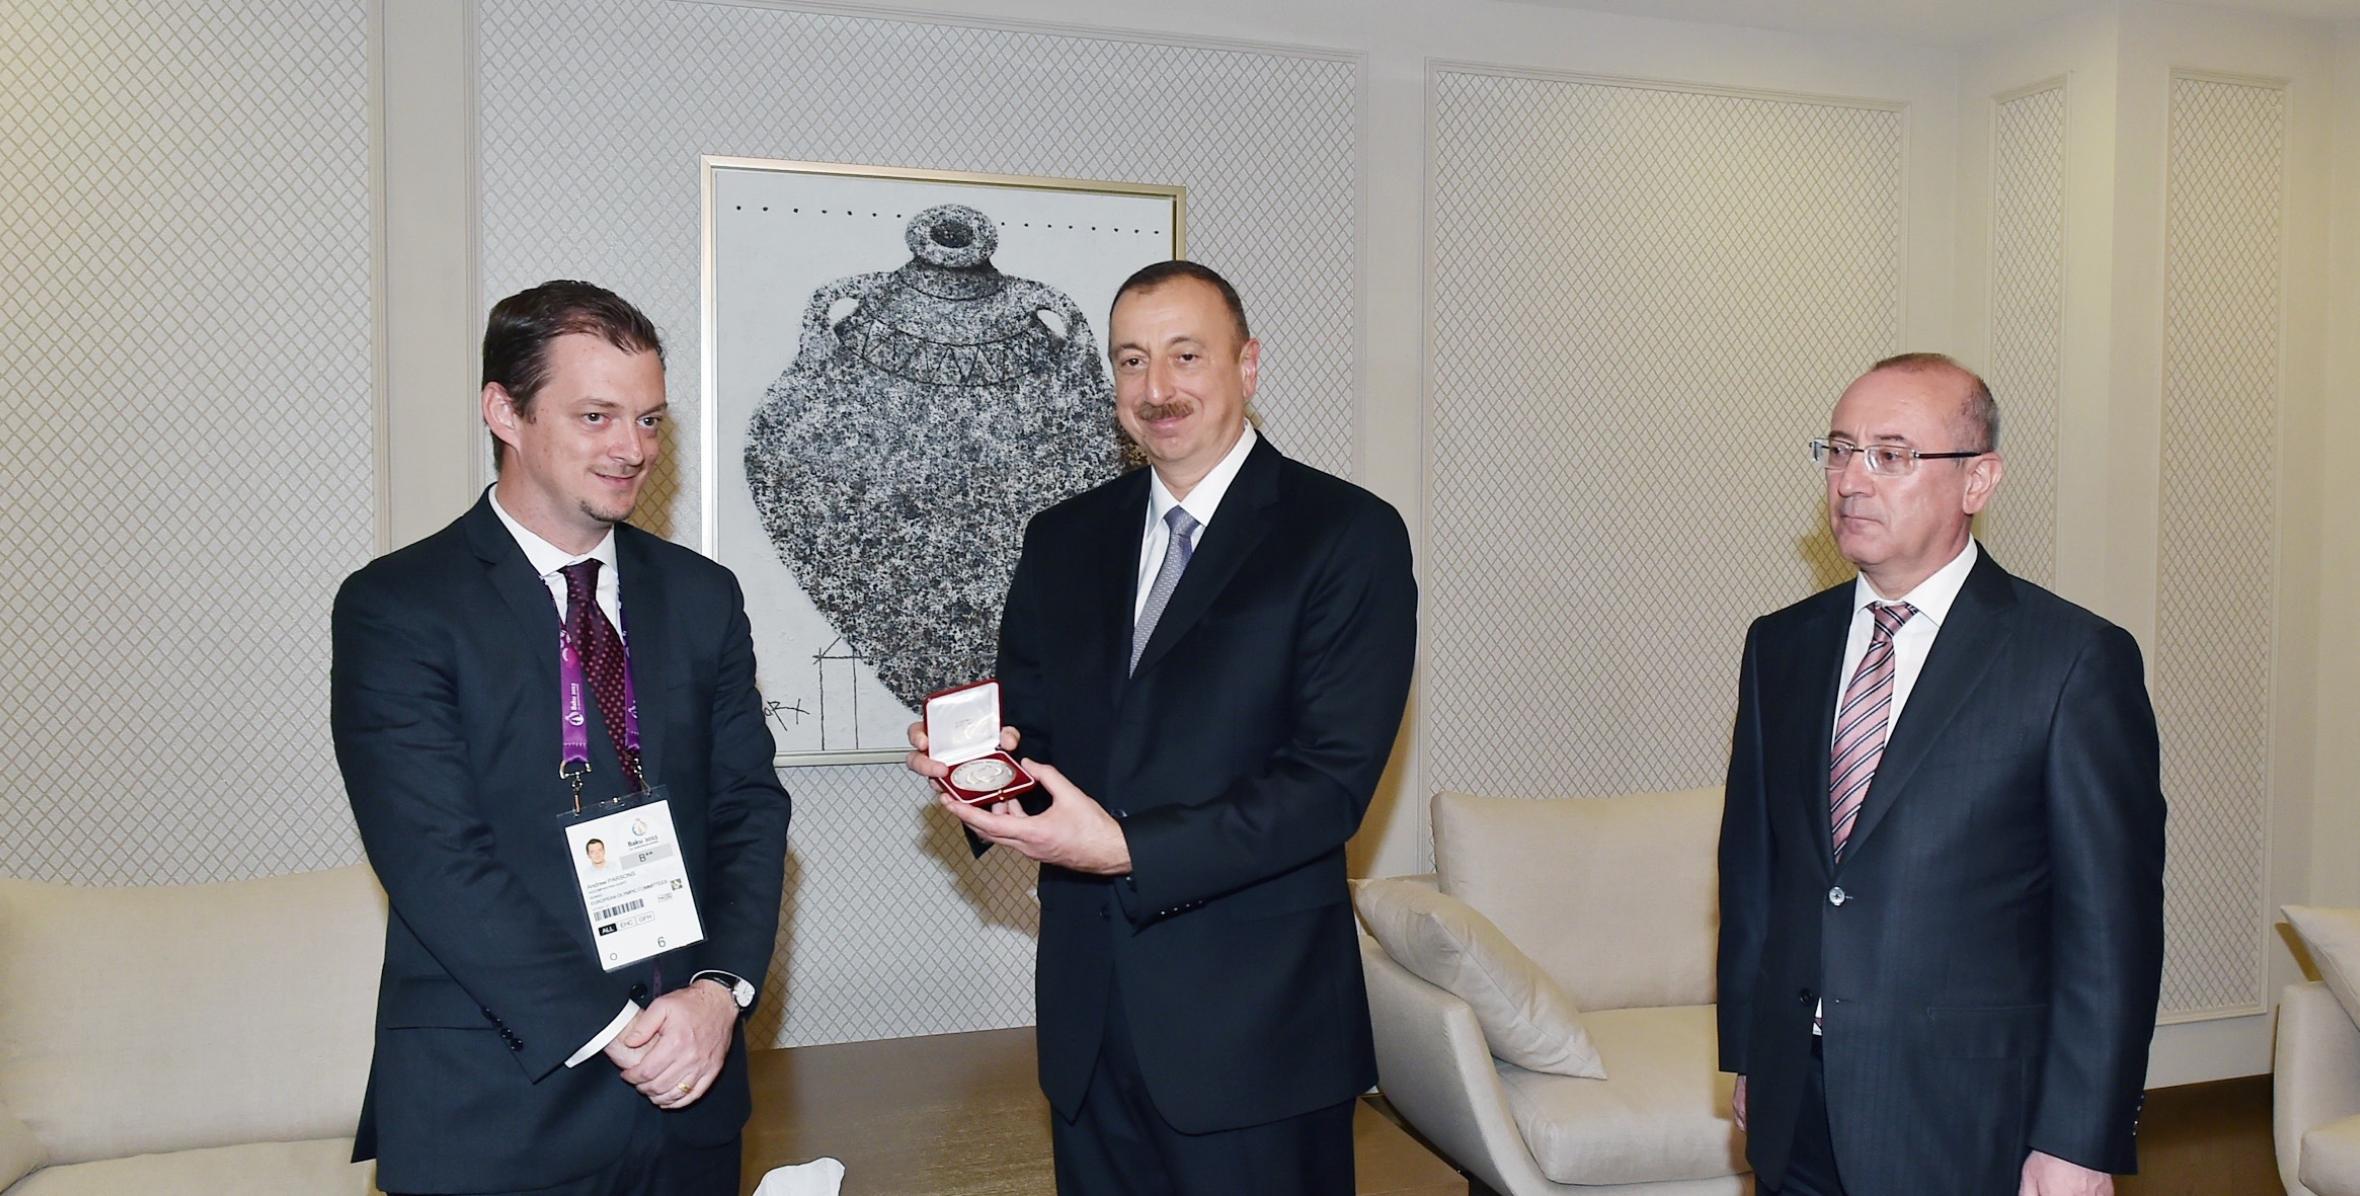 Ilham Aliyev was presented with Paralympic Honour award and a special keepsake of the International Paralympic Committee